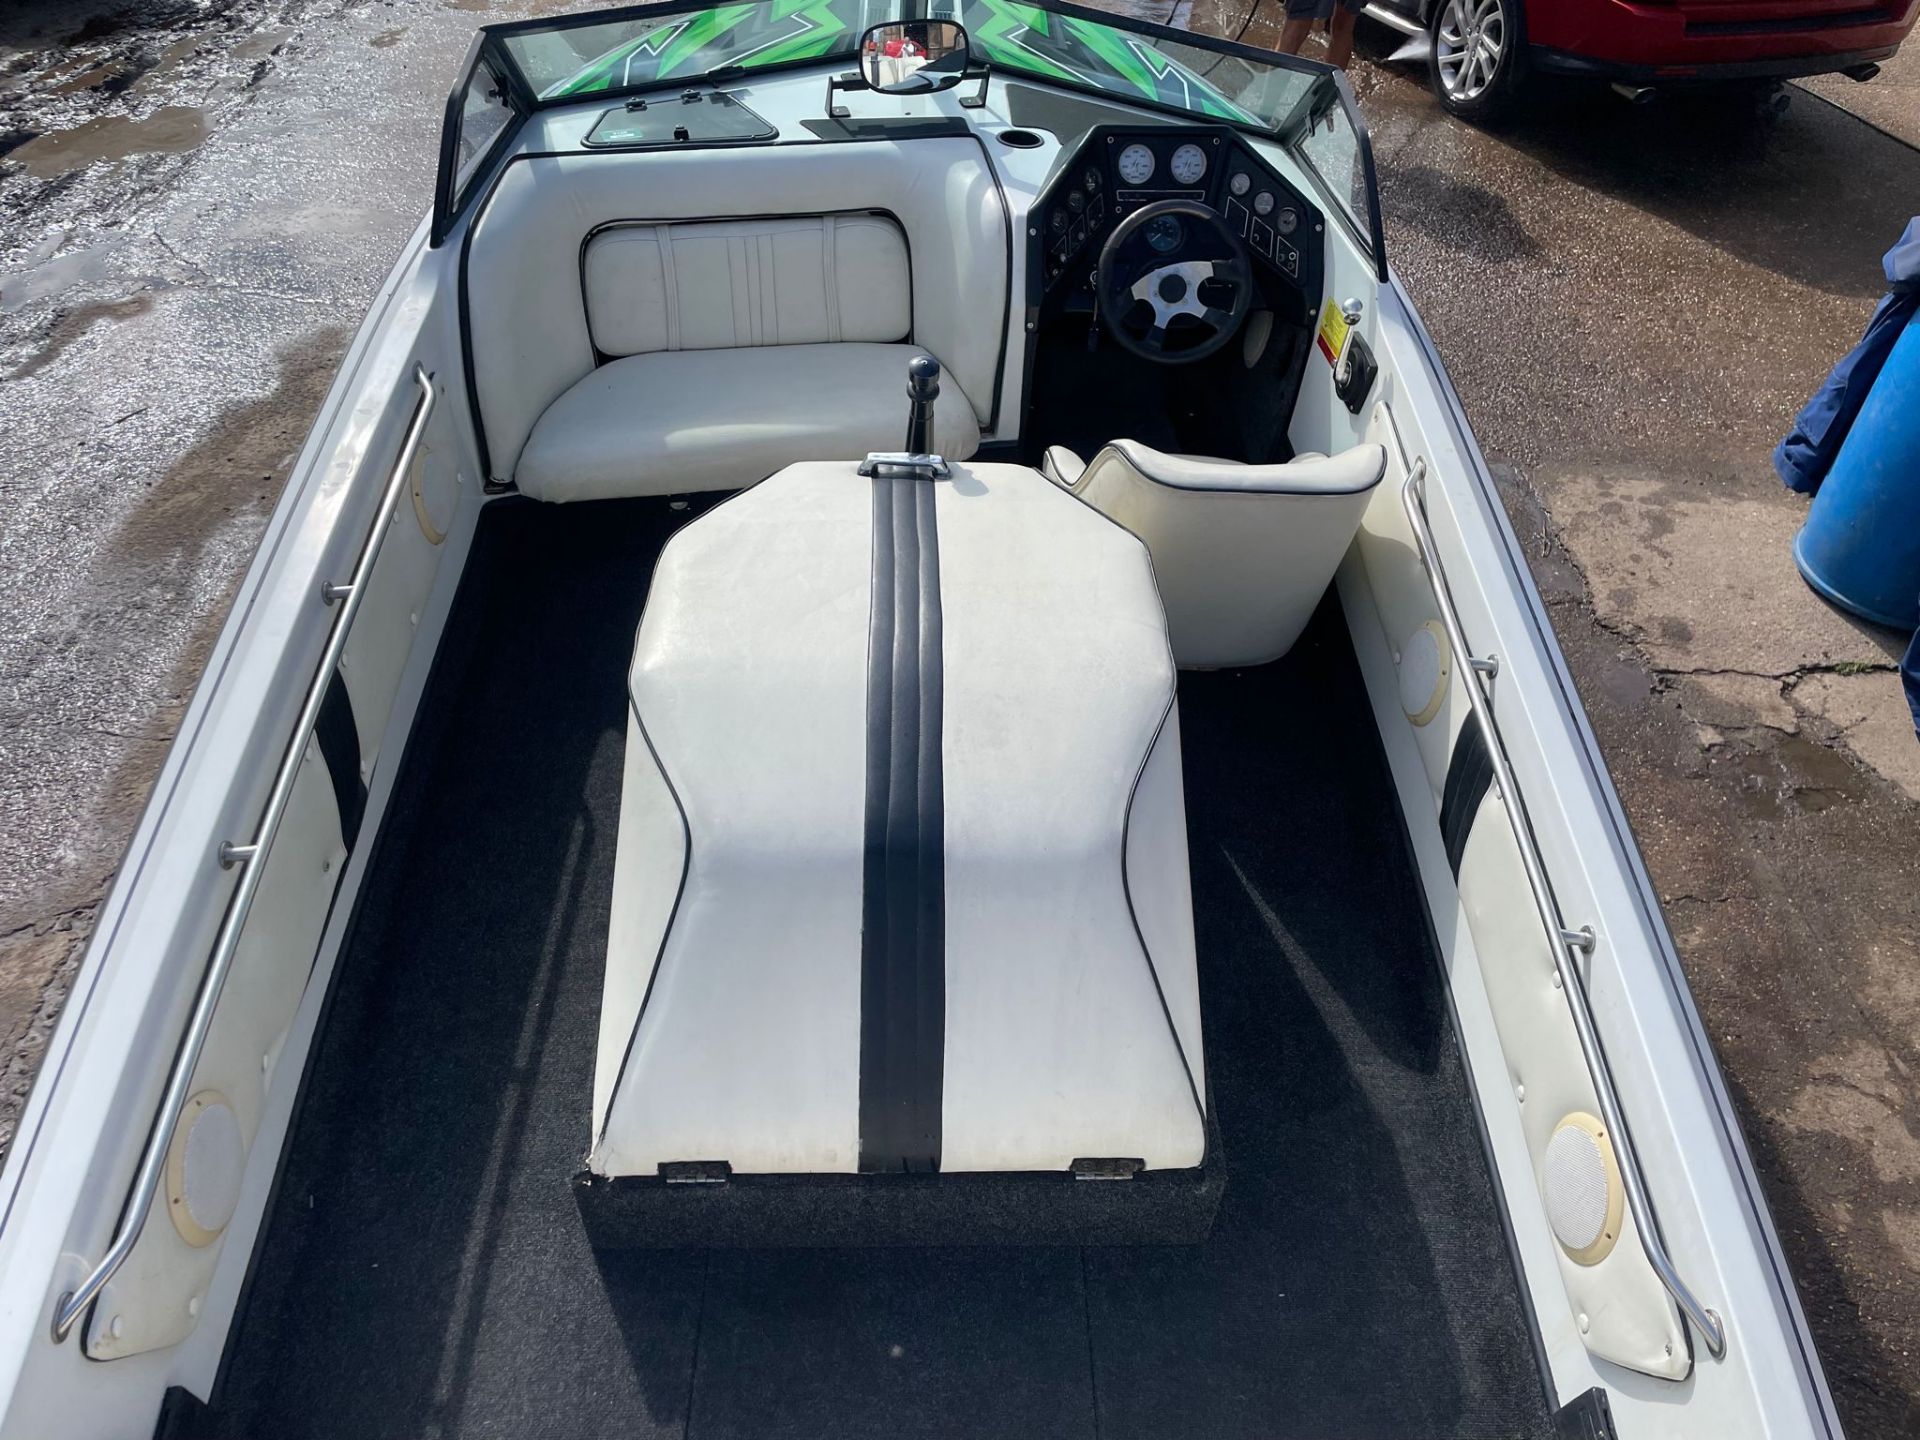 SUPRA BOAT, C/W TRAILER, RUNS AND WORKS ON LPG GAS *NO VAT* - Image 9 of 12